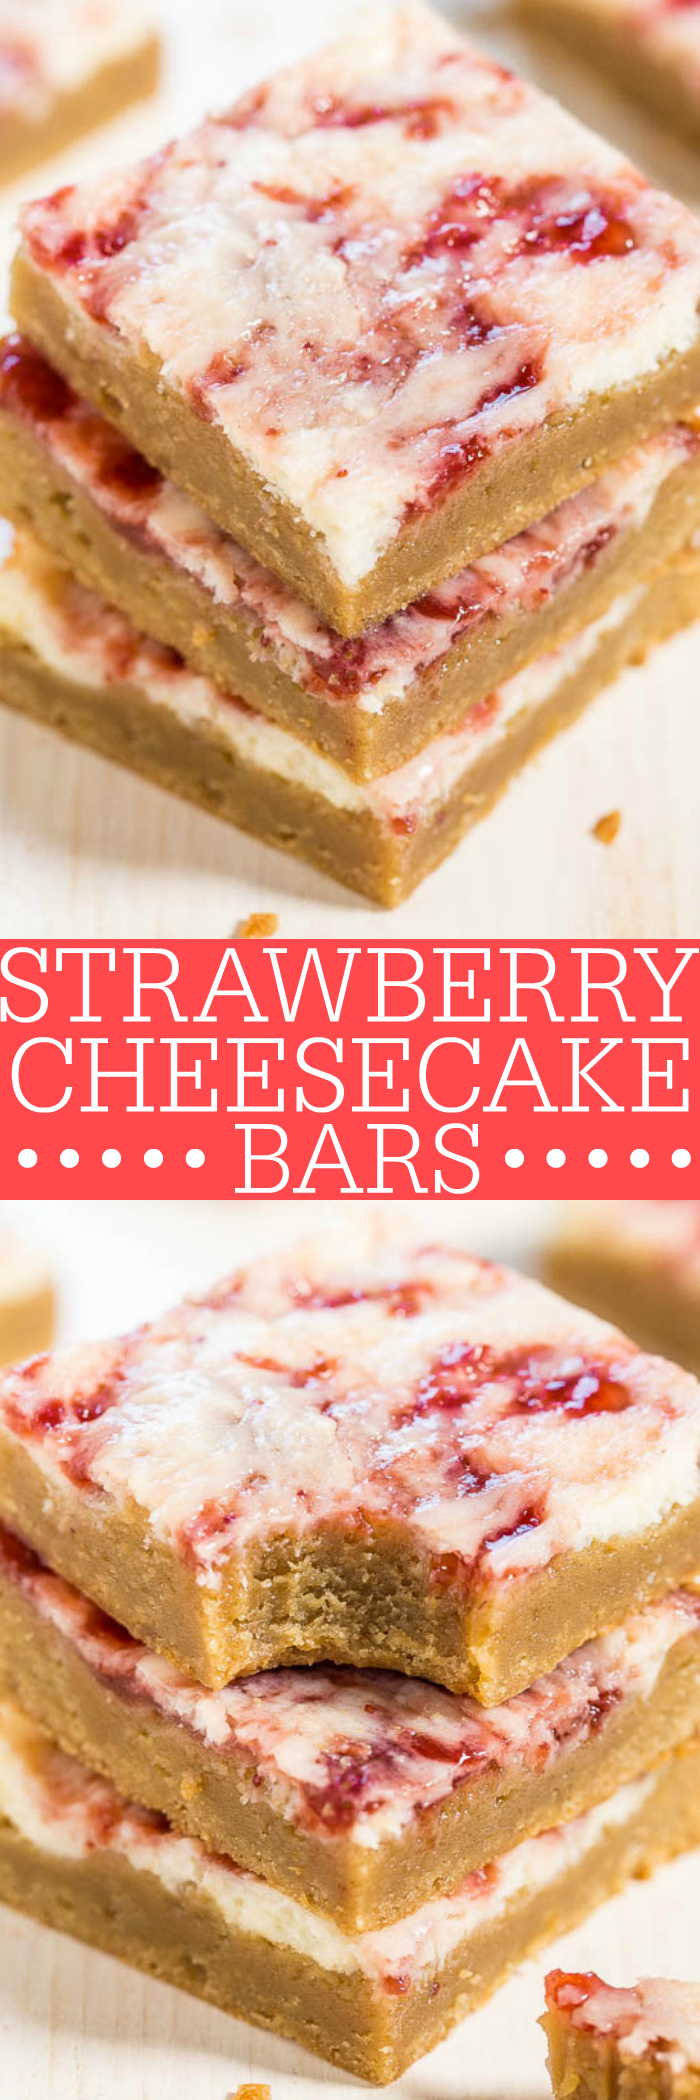 Strawberry Cheesecake Bars - Soft, buttery bars topped with cheesecake and swirled with strawberry jam! The best of all worlds in these fast, easy, and AMAZING bars!!